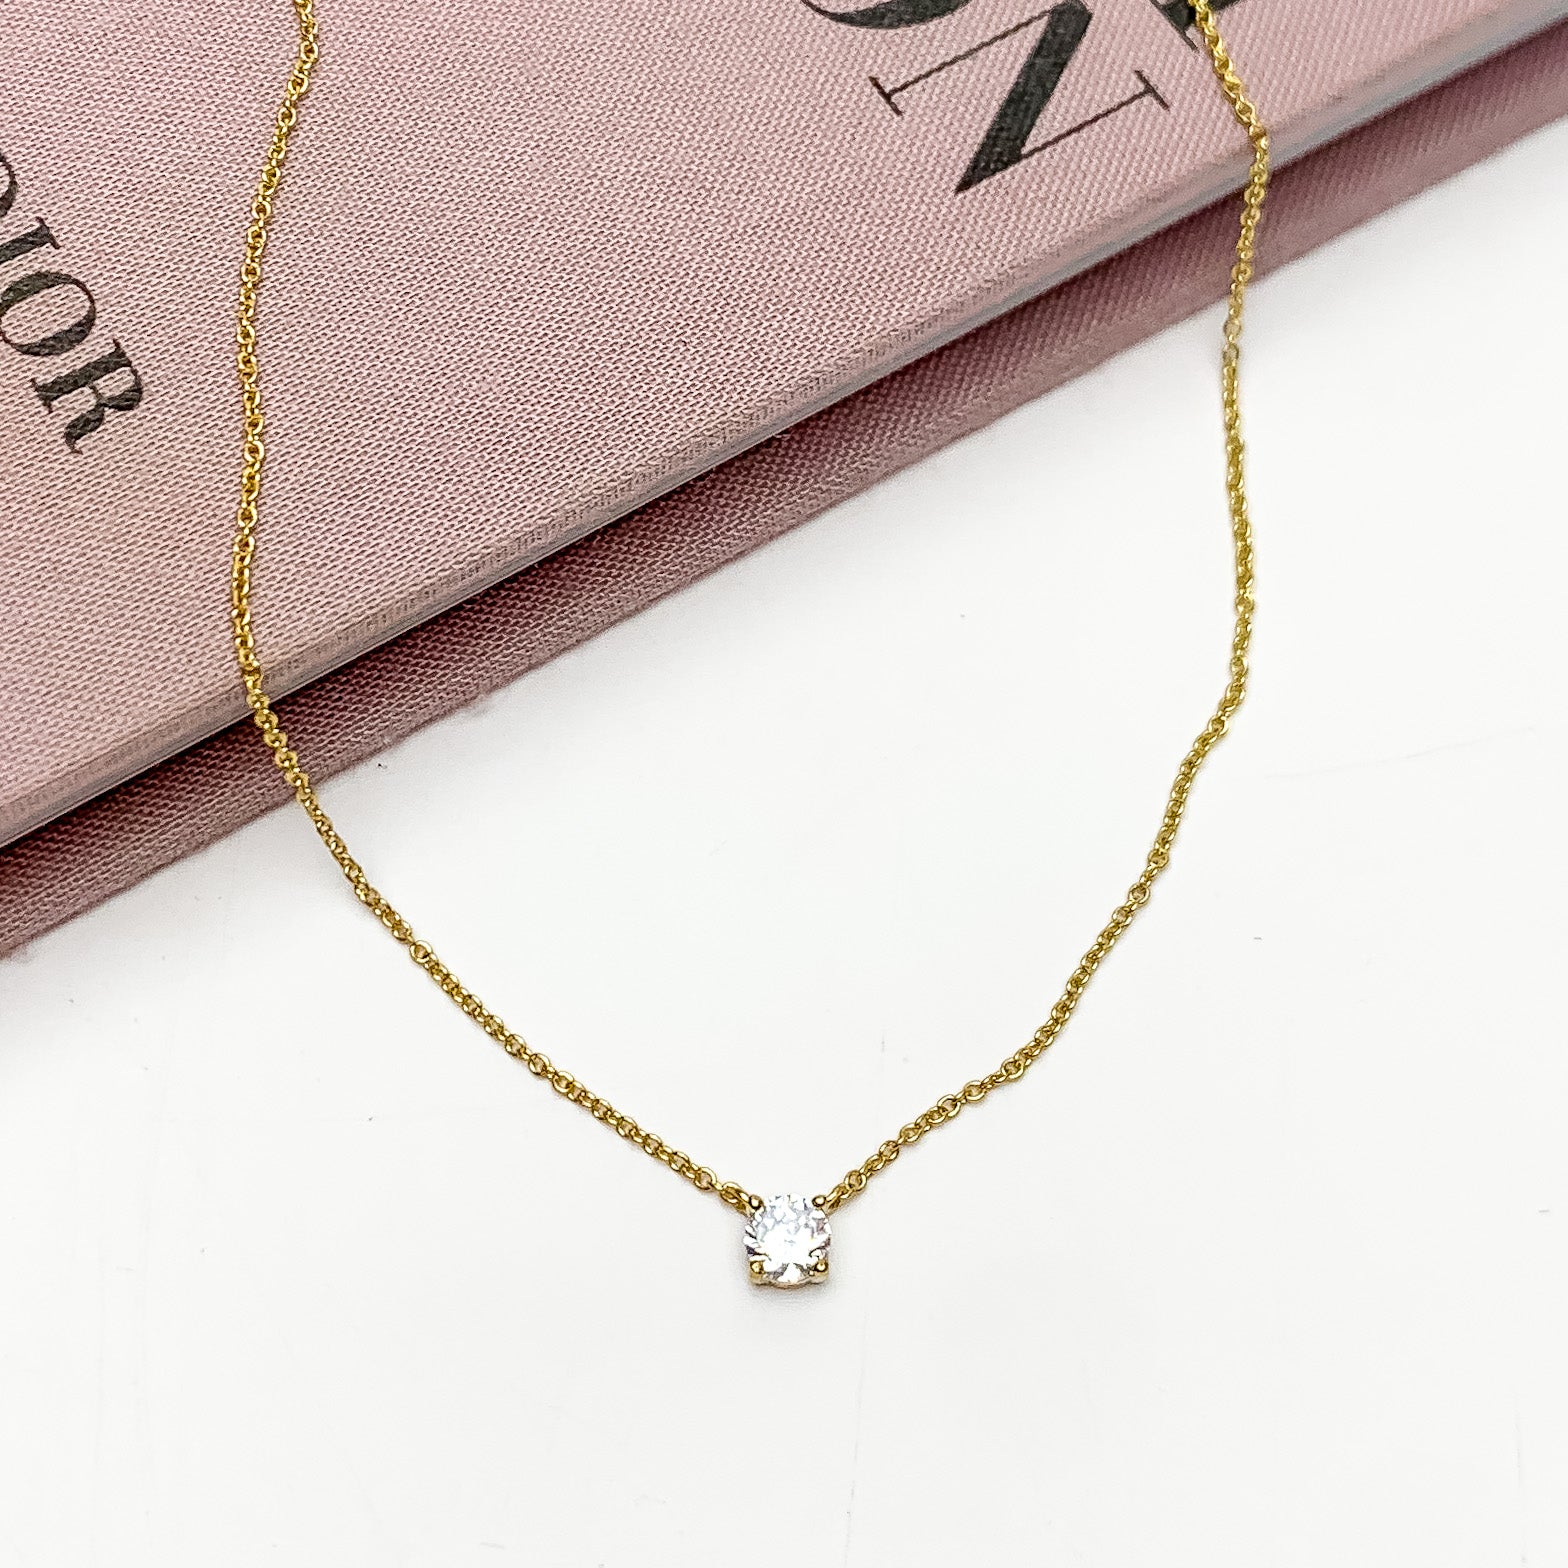 Gold Tone Simple Necklace With Clear Crystal. Pictured on a white background with the top of the necklace on a pink book.